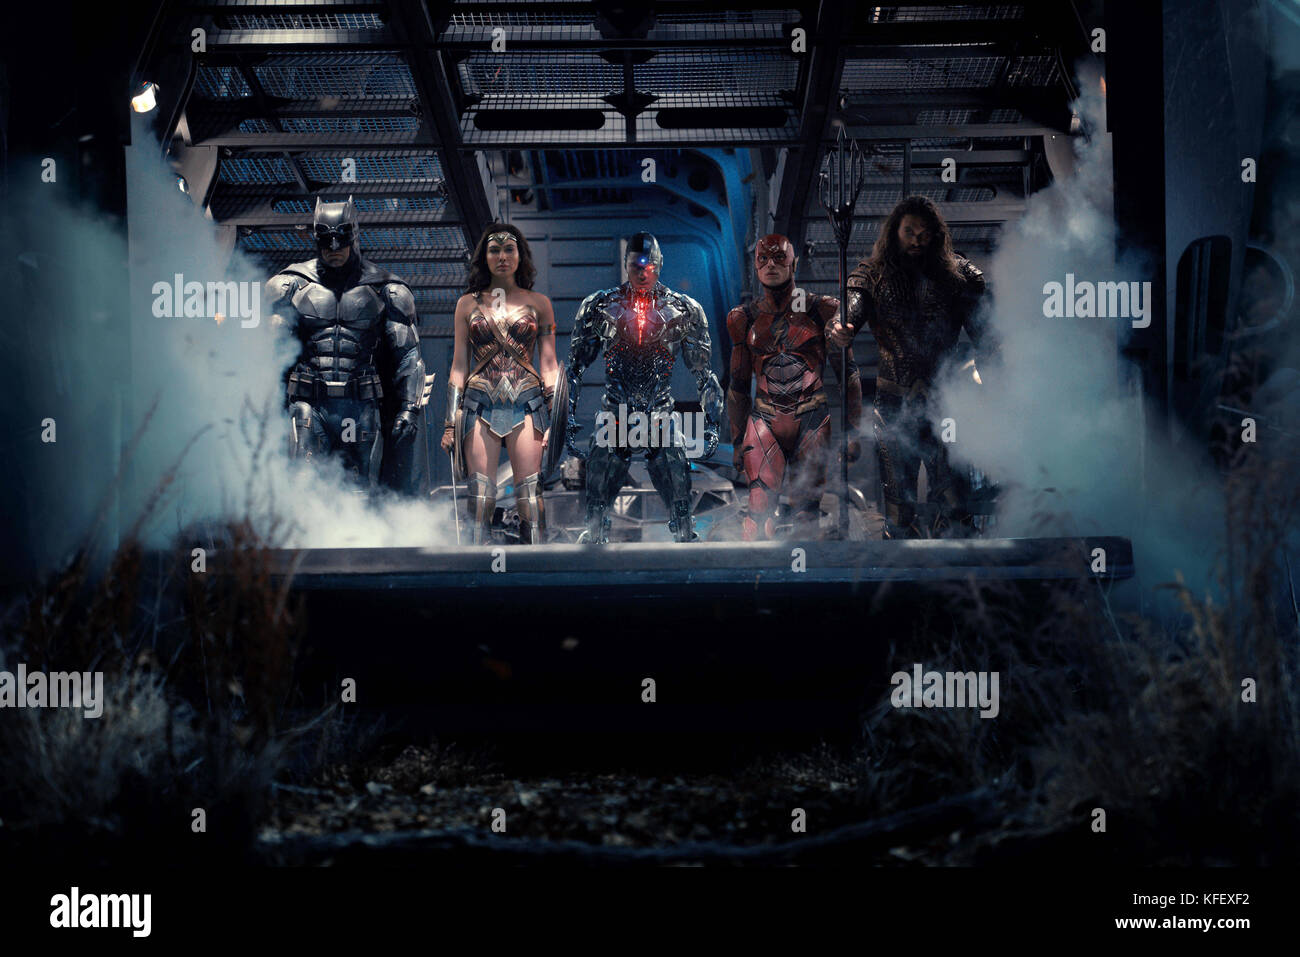 RELEASE DATE: November 17, 2017 TITLE: Justice League STUDIO: DC Comics DIRECTOR: Zack Snyder PLOT: Fueled by his restored faith in humanity and inspired by Superman's selfless act, Bruce Wayne enlists the help of his newfound ally, Diana Prince, to face an even greater enemy. STARRING: BEN AFFLECK as Bruce Wayne / Batman, GAL GADOT as Diana Prince / Wonder Woman, JASON MOMOA as Arthur Curry / Aquaman, EZRA MILLER as Barry Allen / The Flash, RAY FISHER as Victor Stone / Cyborg. (Credit Image: © DC Comics/Entertainment Pictures/ZUMAPRESS.com) Stock Photo